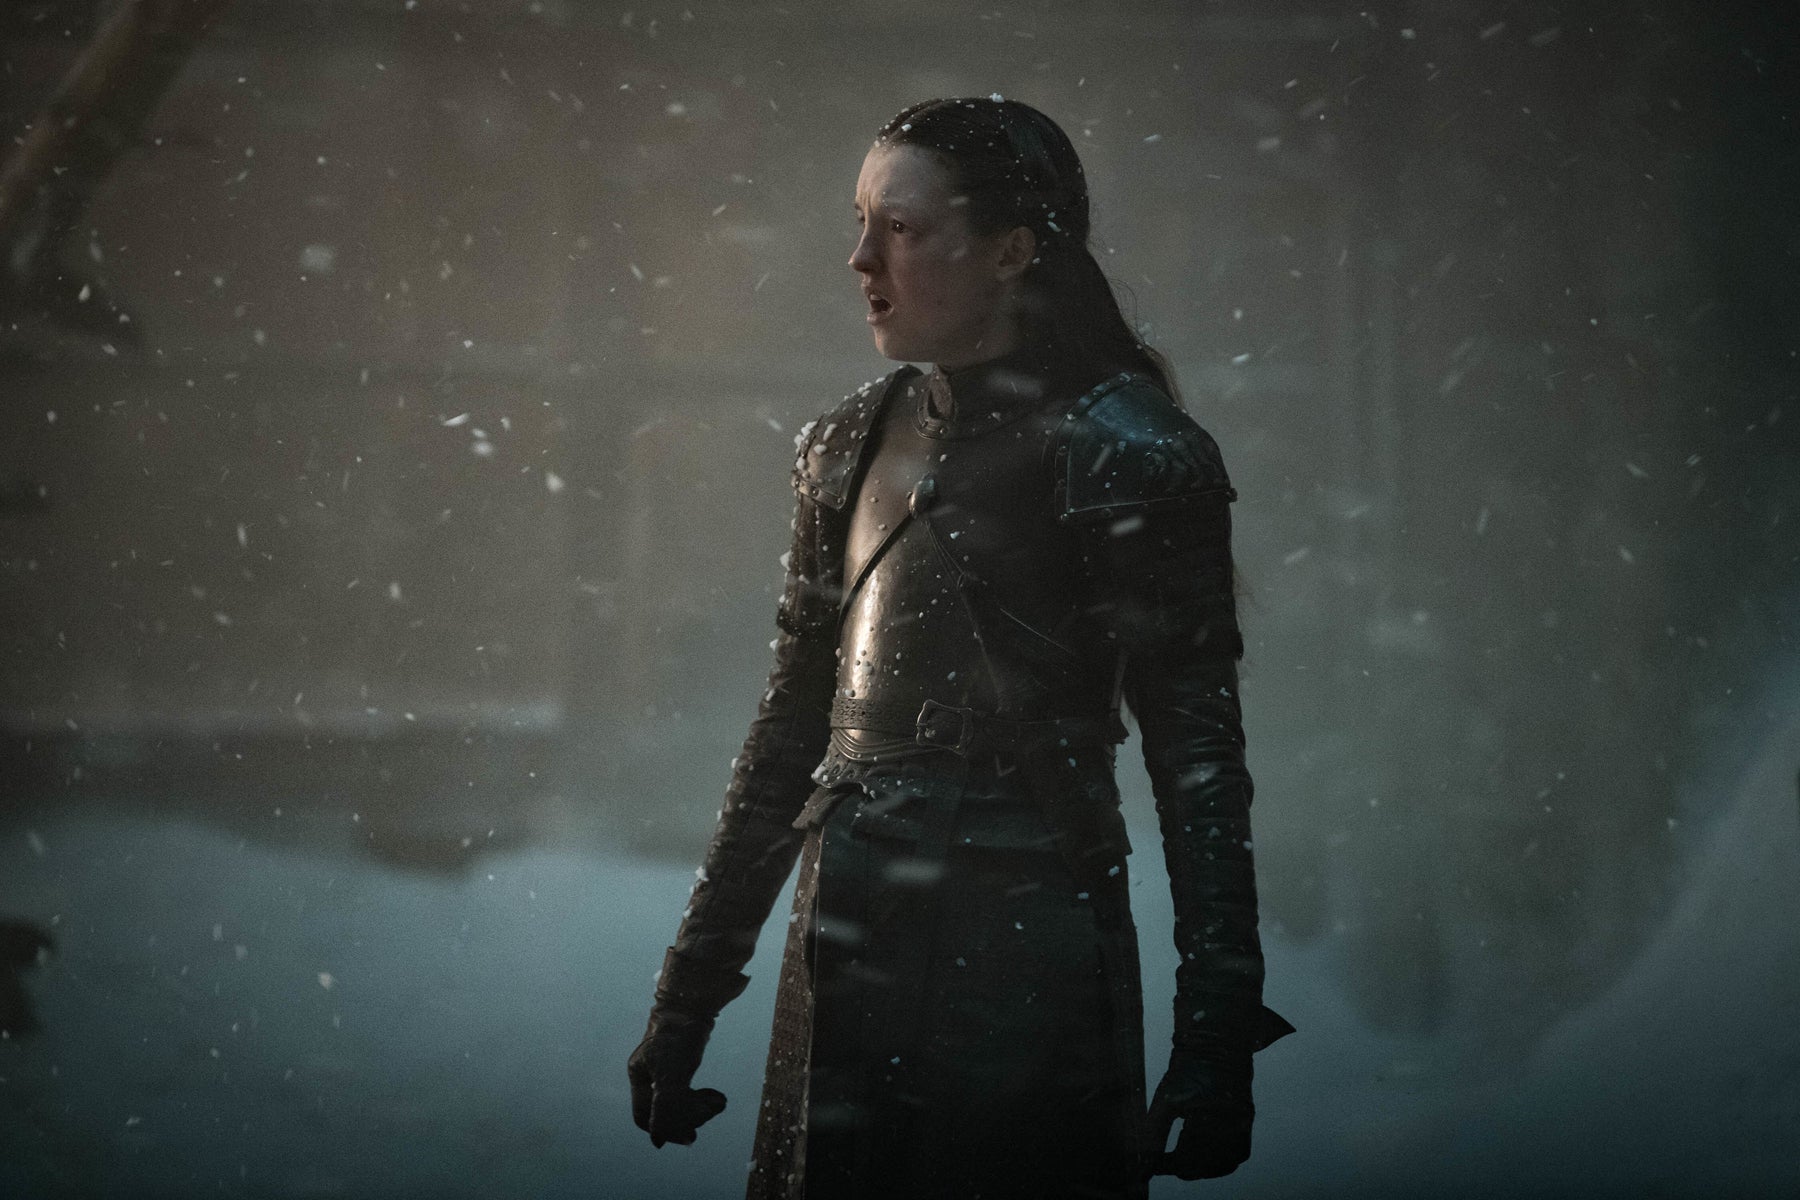 Lyanna Mormont, dressed in armor, stands in the snow and looks off-camera at something approaching.